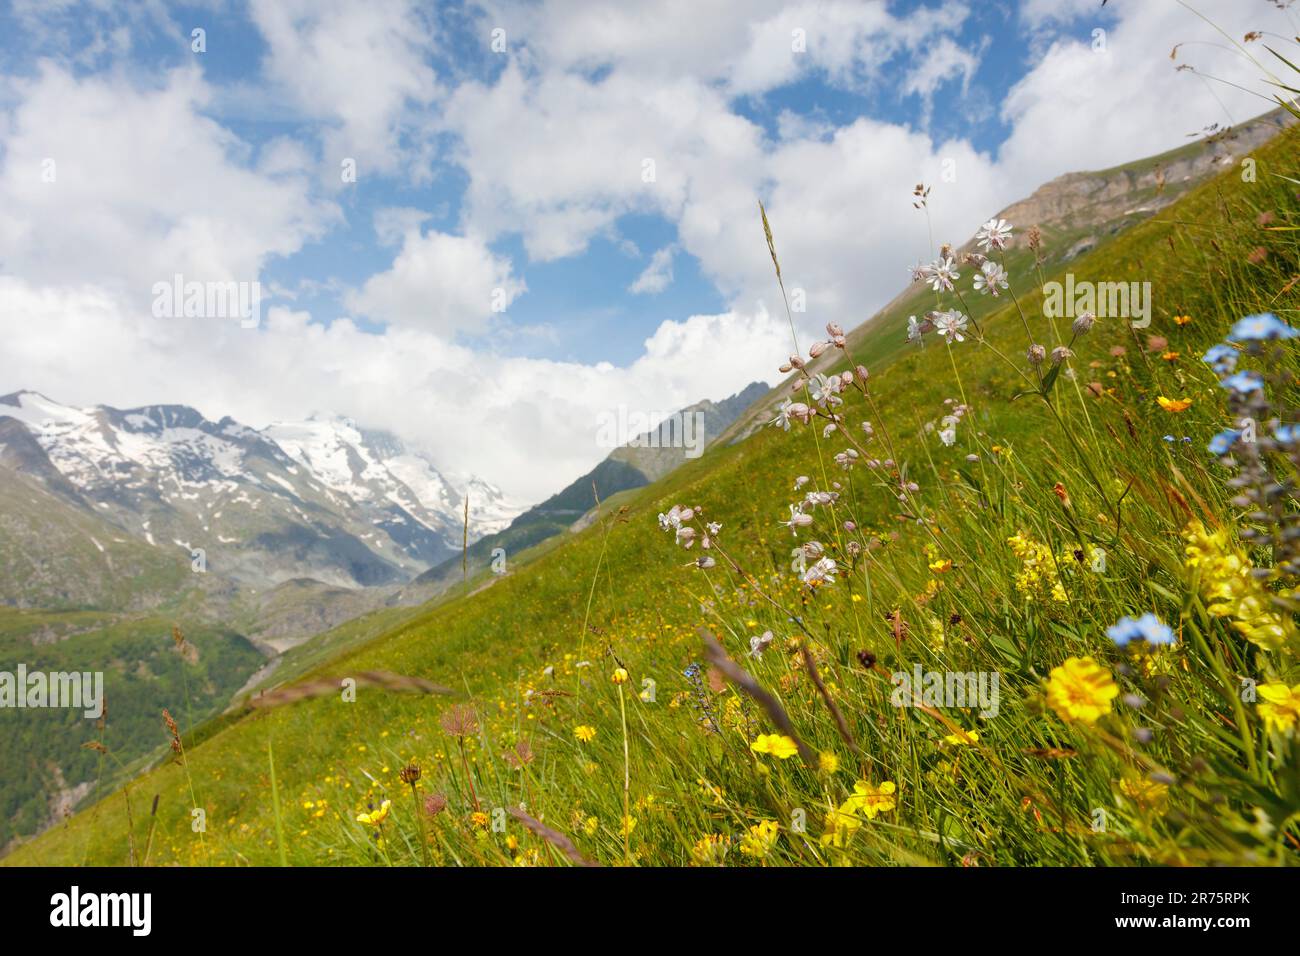 Flower meadow in high mountain with various high alpine herbs and plants Stock Photo